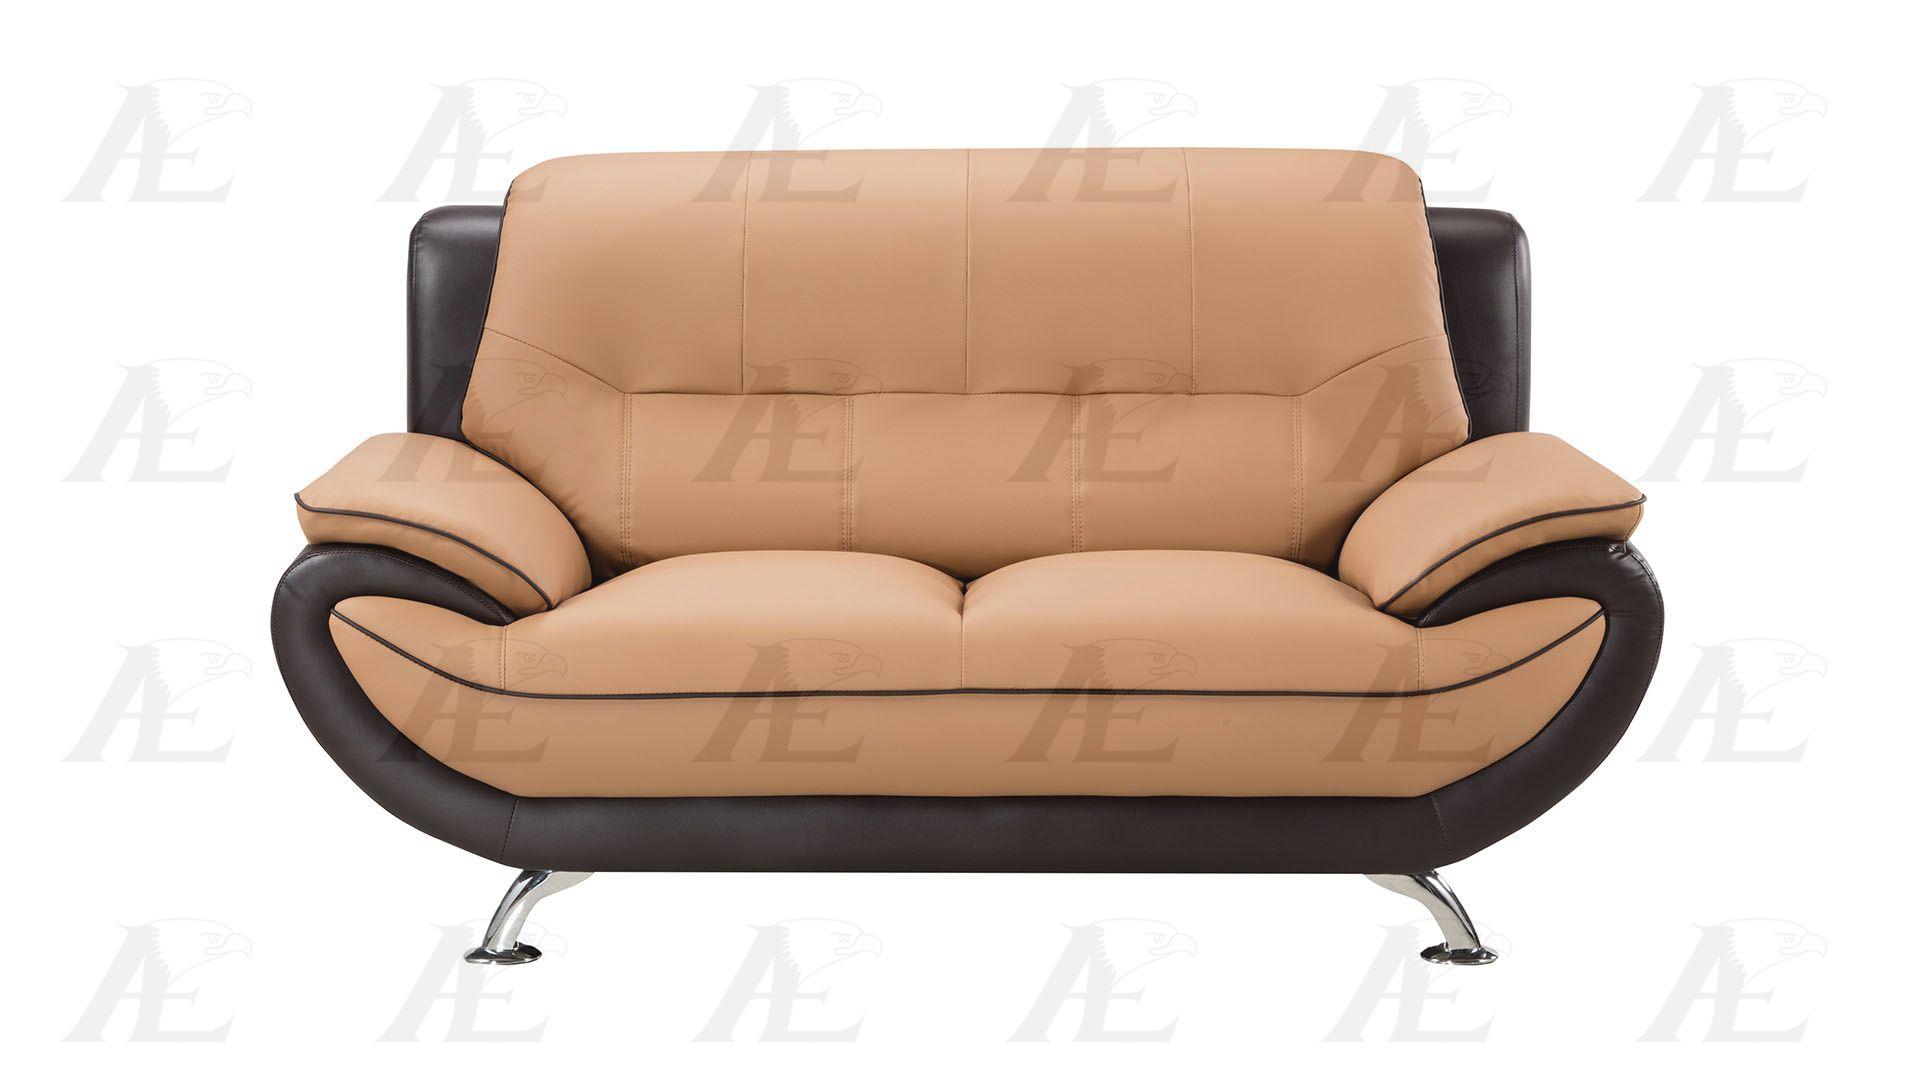 

                    
American Eagle Furniture AE208-YO.BR Sofa Loveseat and Chair Set Brown/Yellow Leatherette Purchase 
